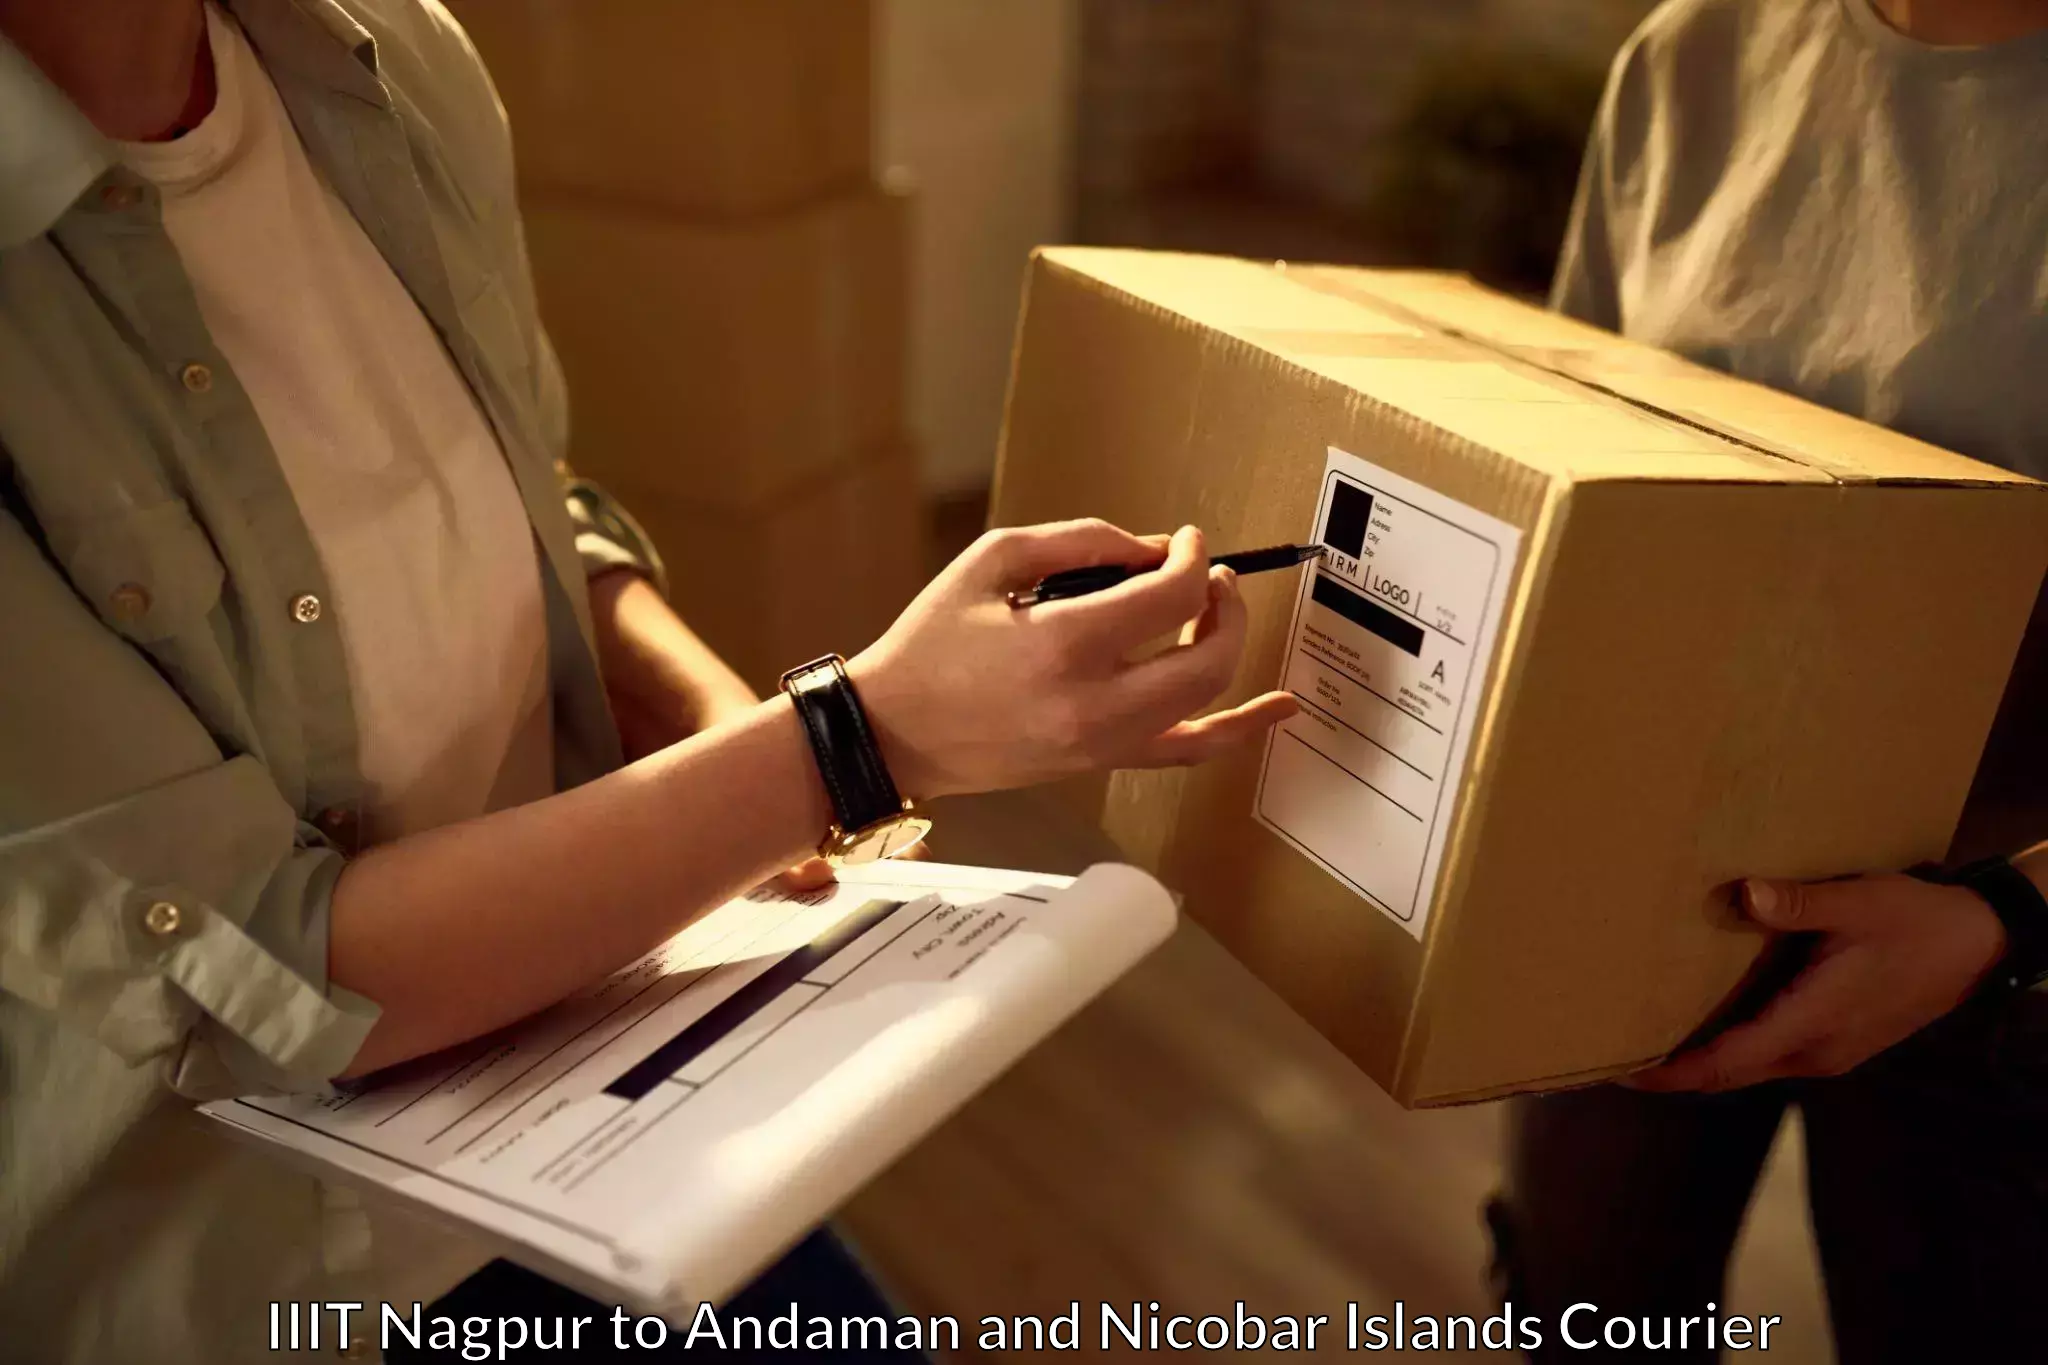 Small business couriers IIIT Nagpur to North And Middle Andaman